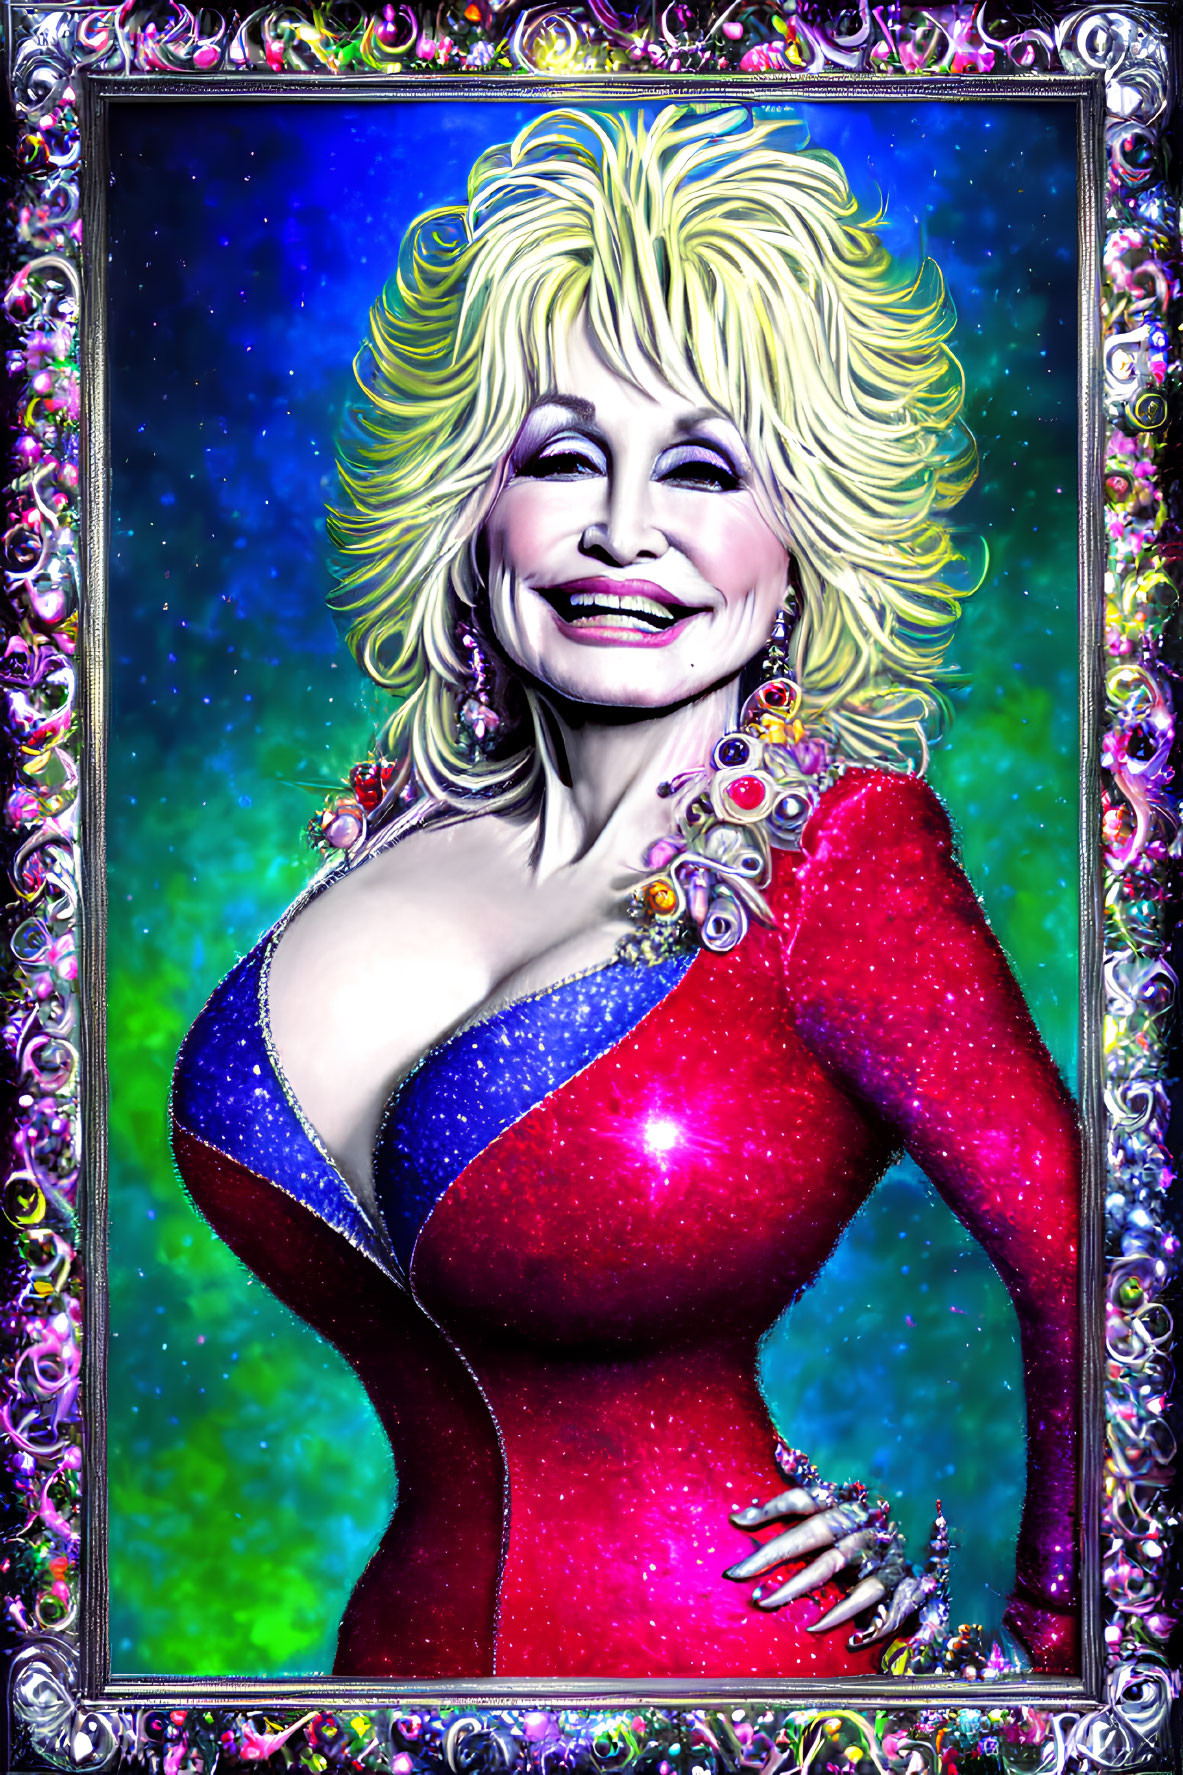 Colorful Portrait of Smiling Woman in Sparkly Outfit